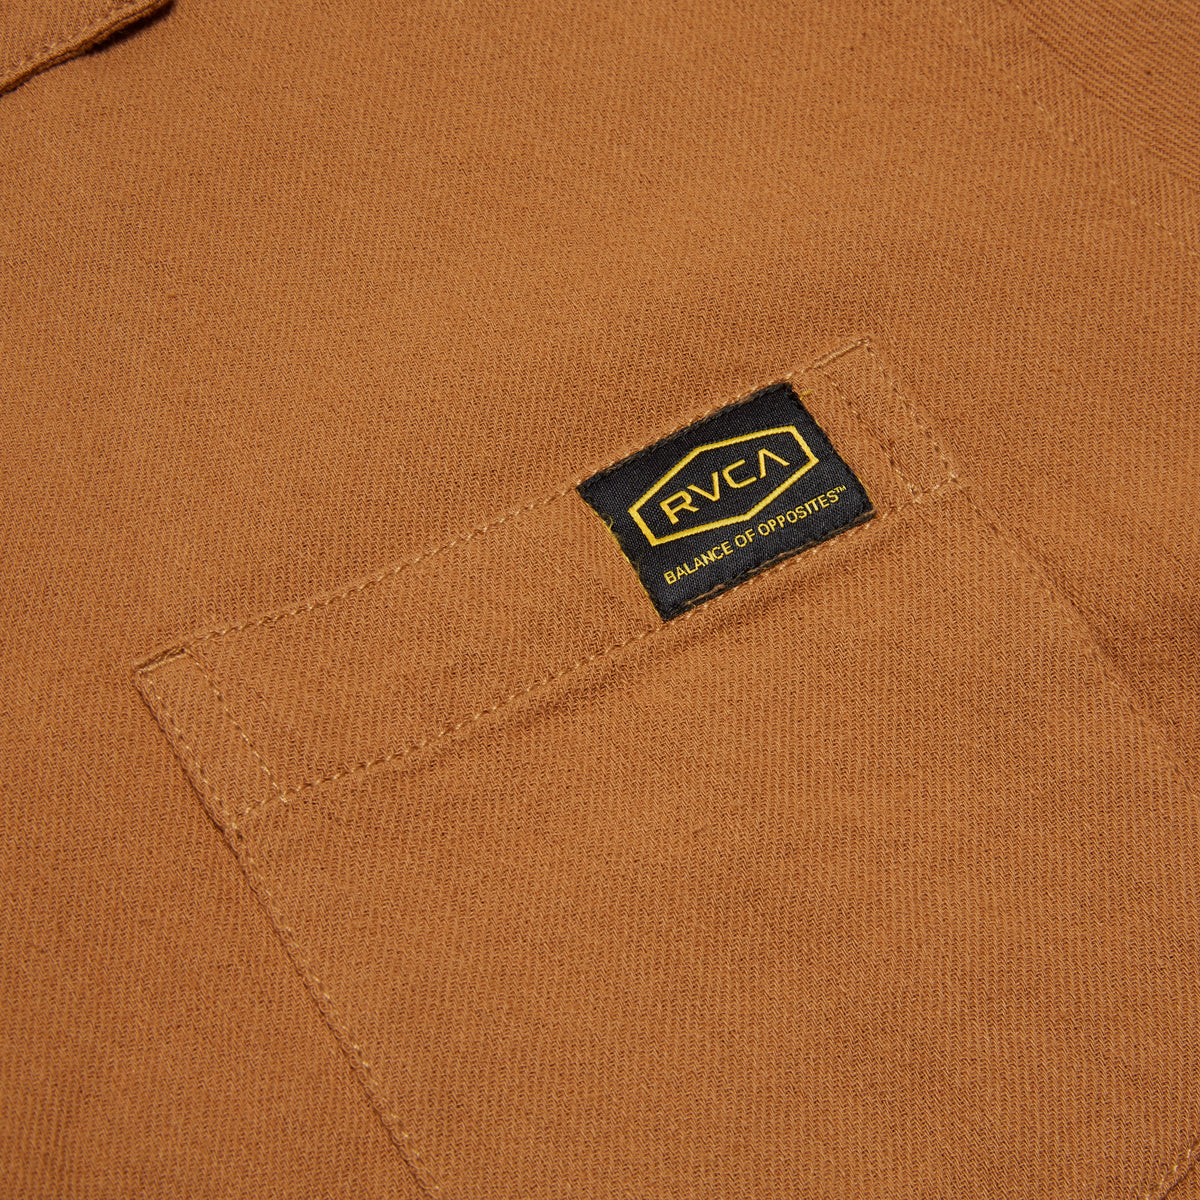 RVCA Day Shift Solid Shirt - Camel image 3